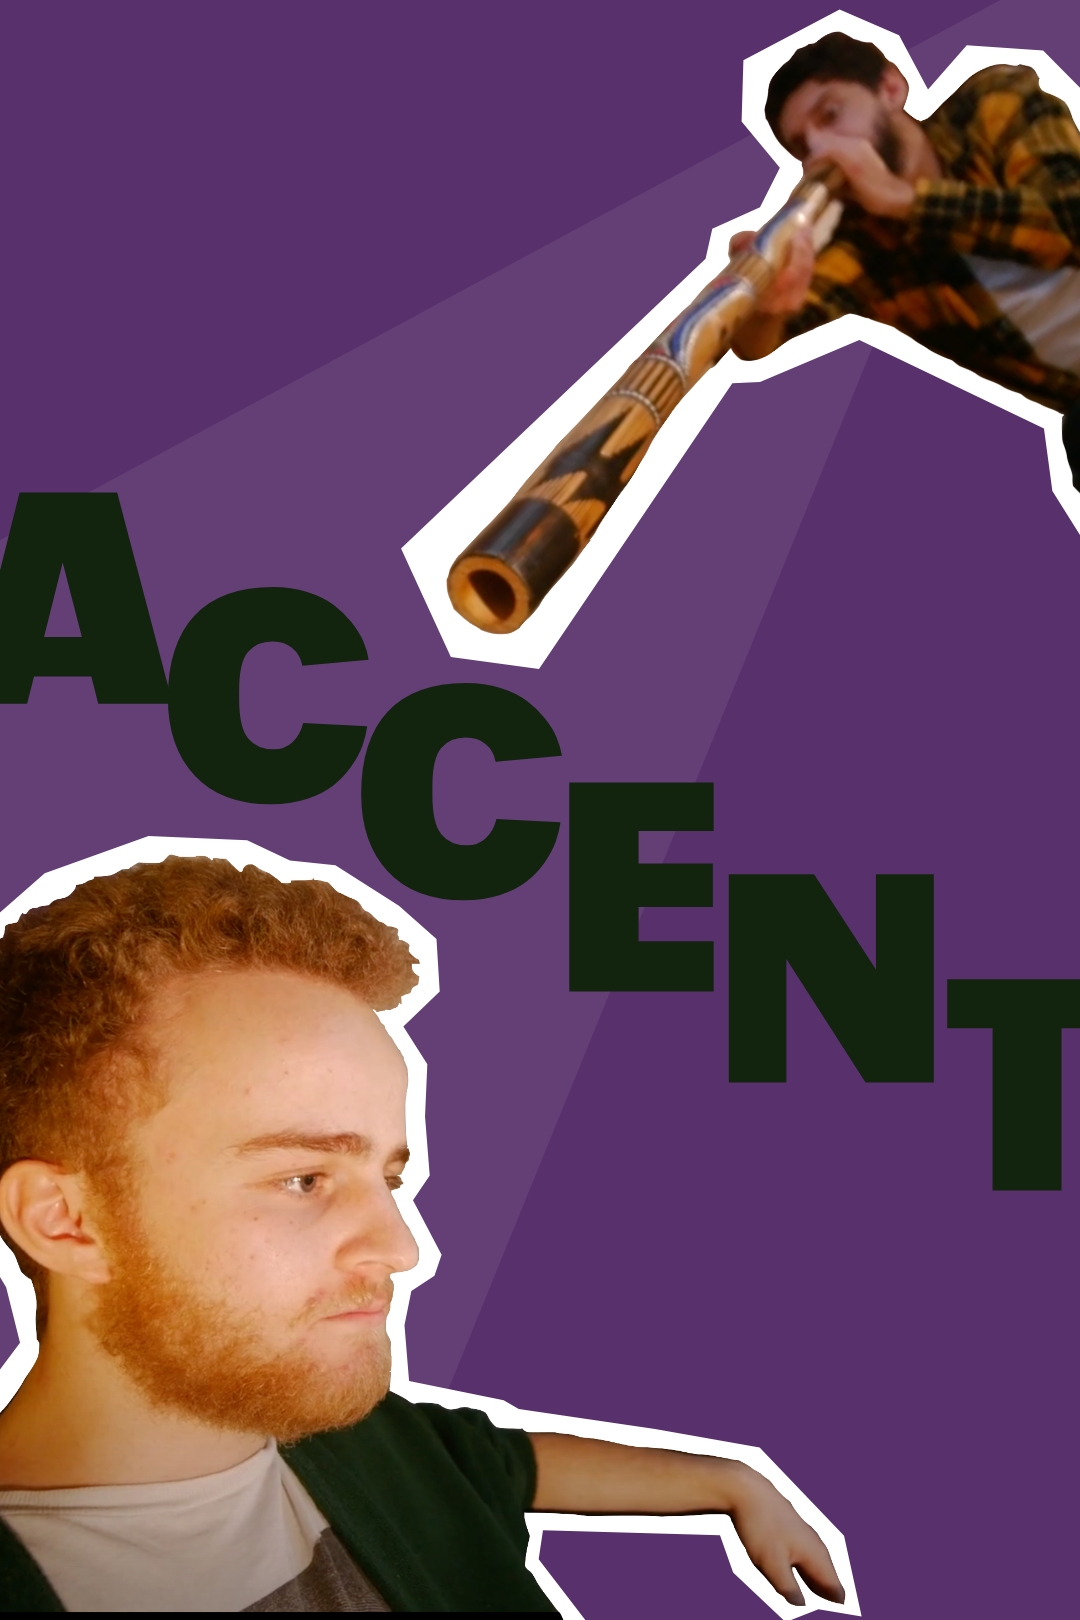 Poster for the film "Accent"